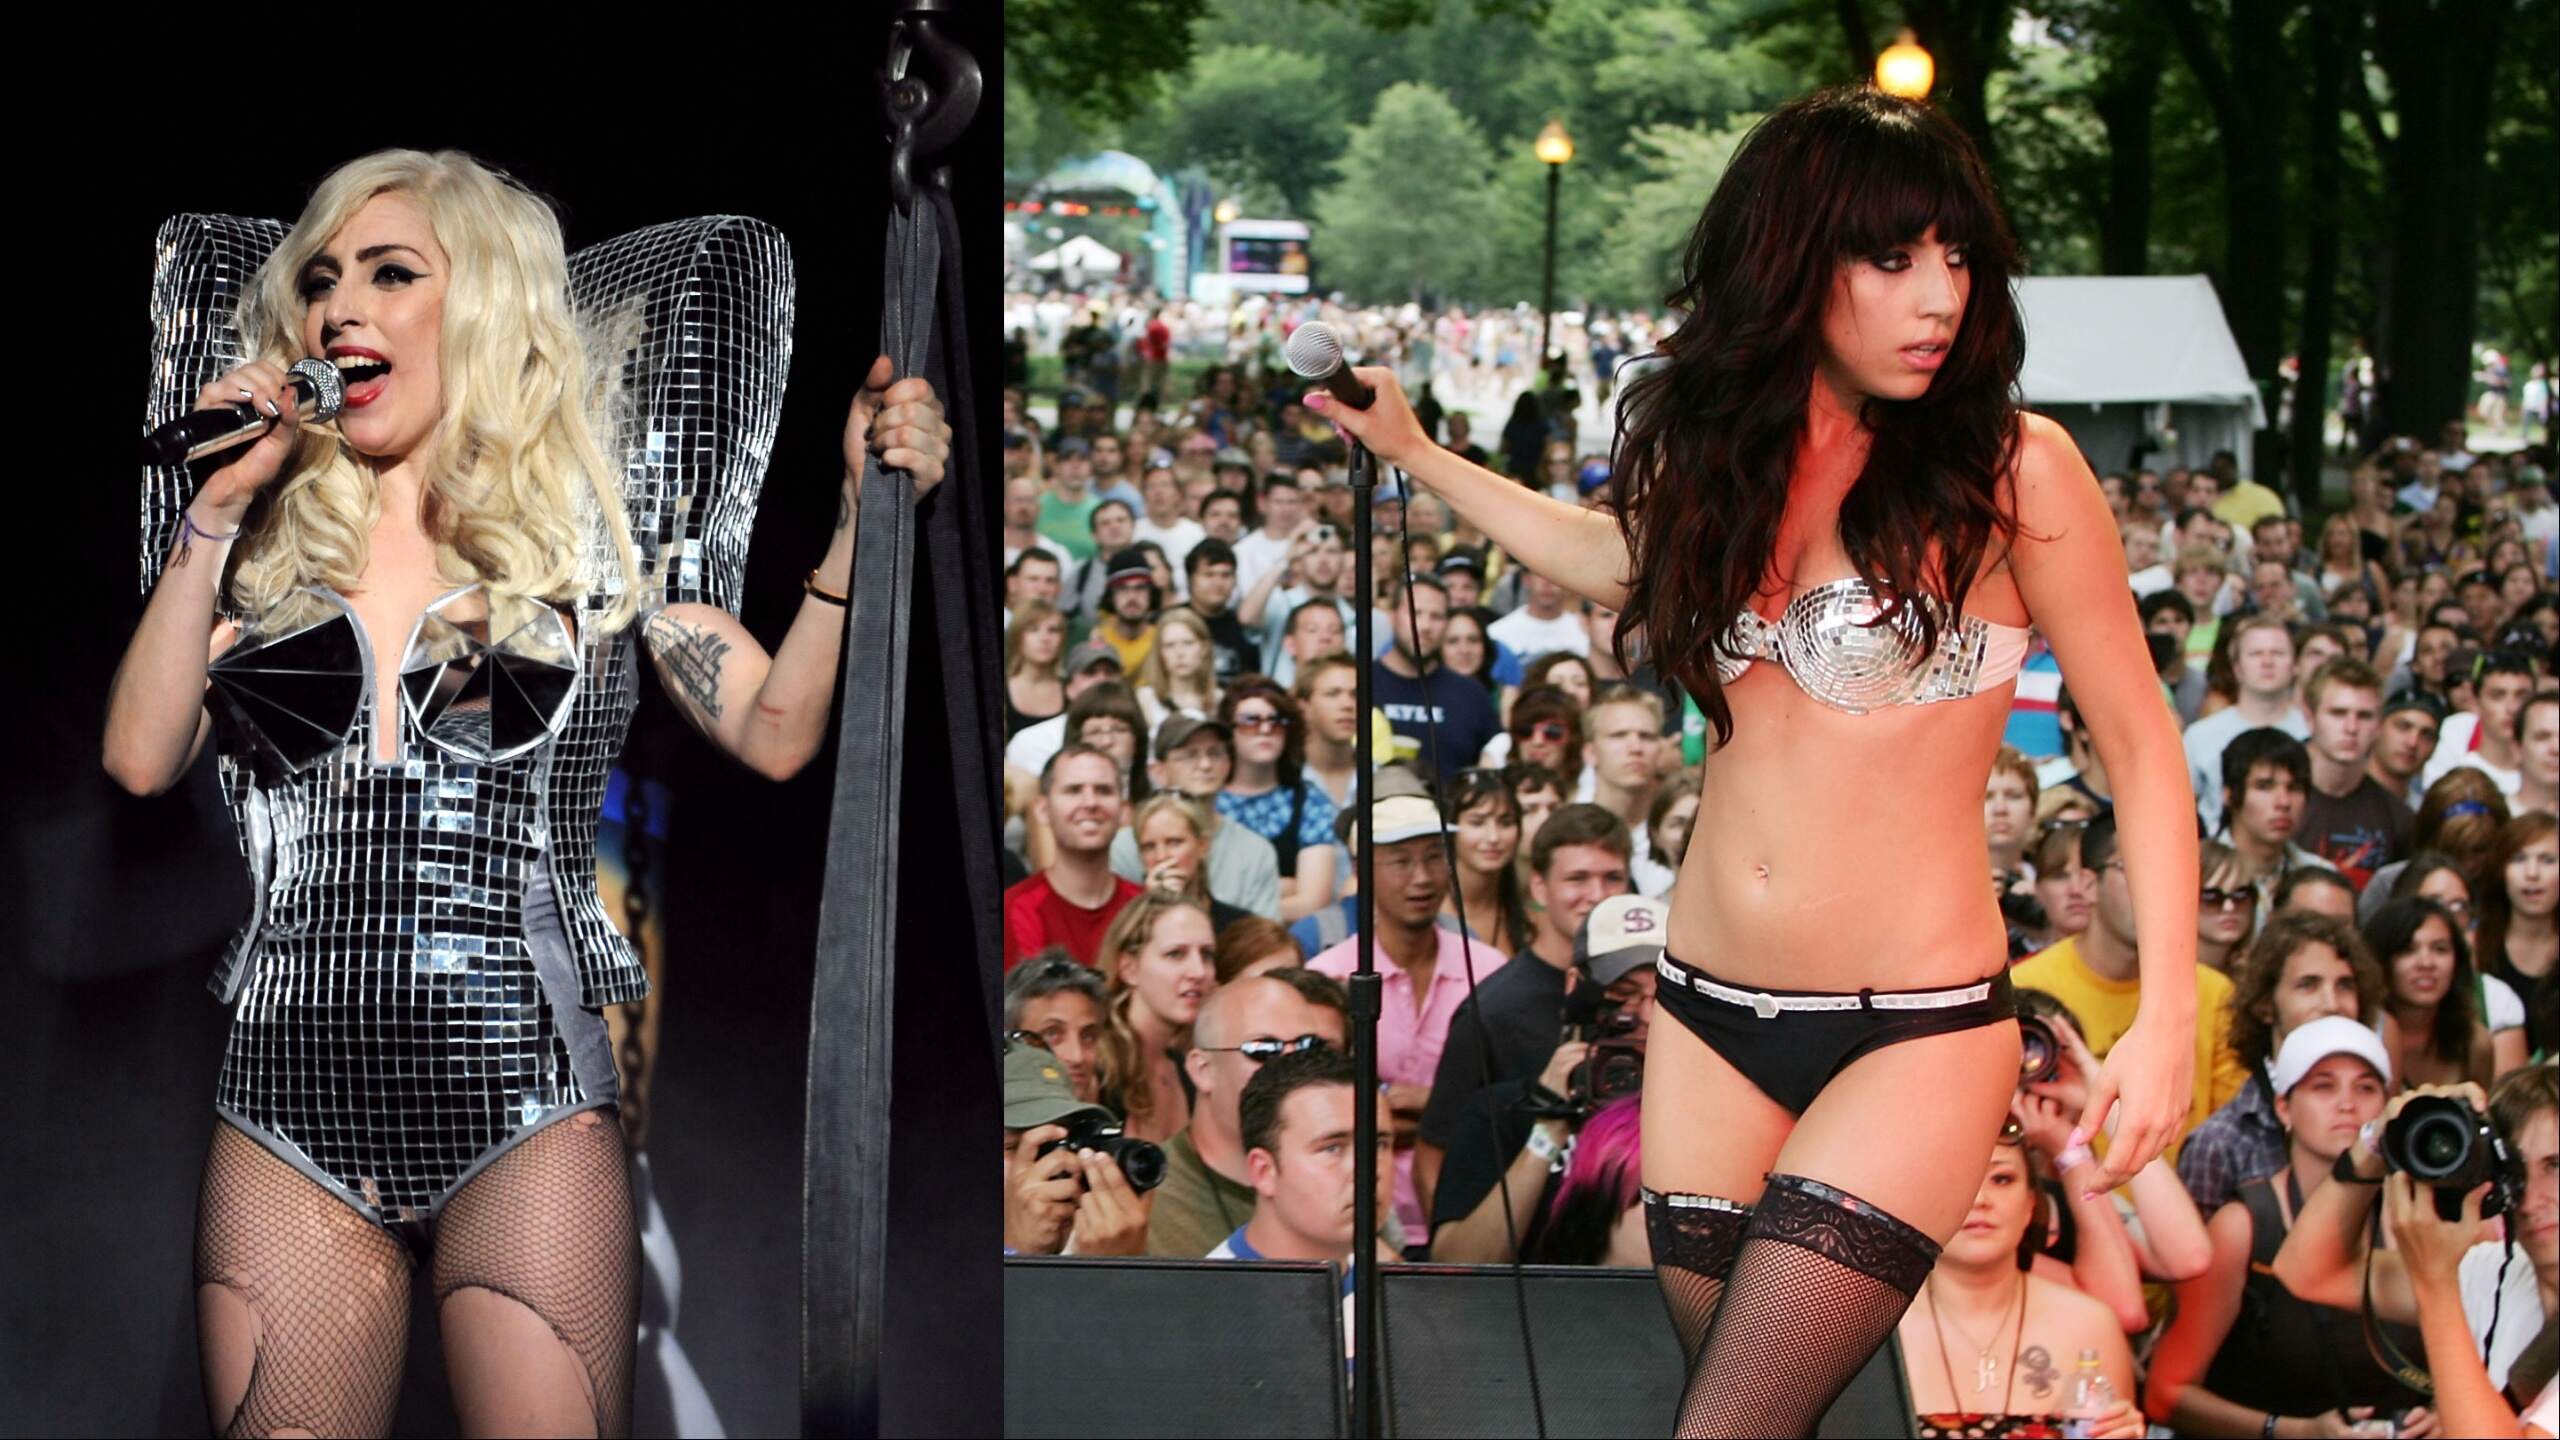 Lady Gaga performs at Nokia Theatre and Lollapalooza in 2009 wearing disco ball outfits